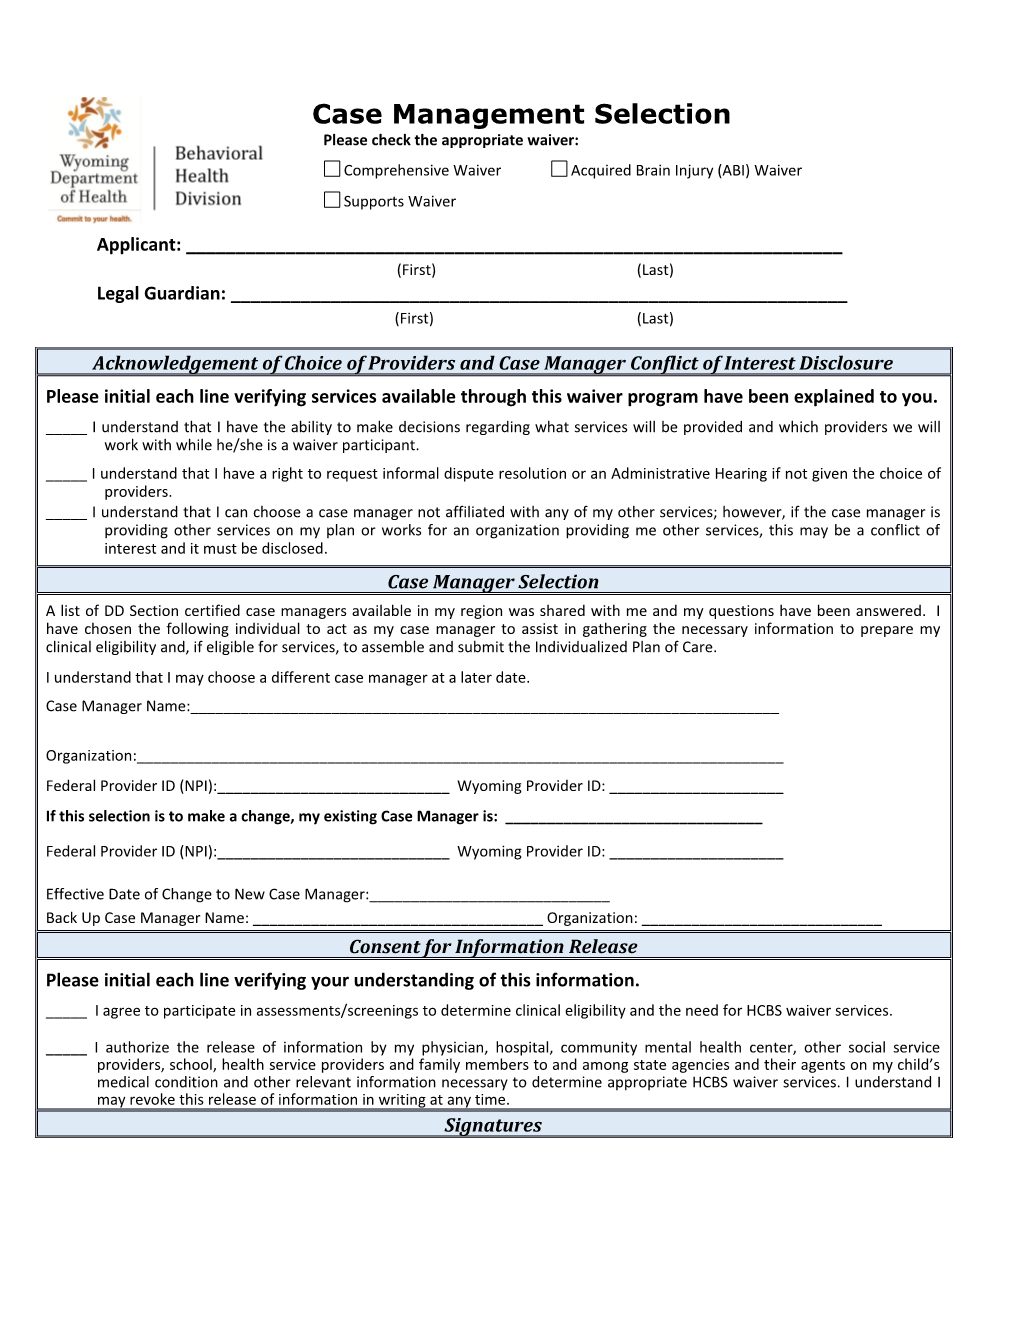 Mail This Form to the DD Section Participant Support Specialist